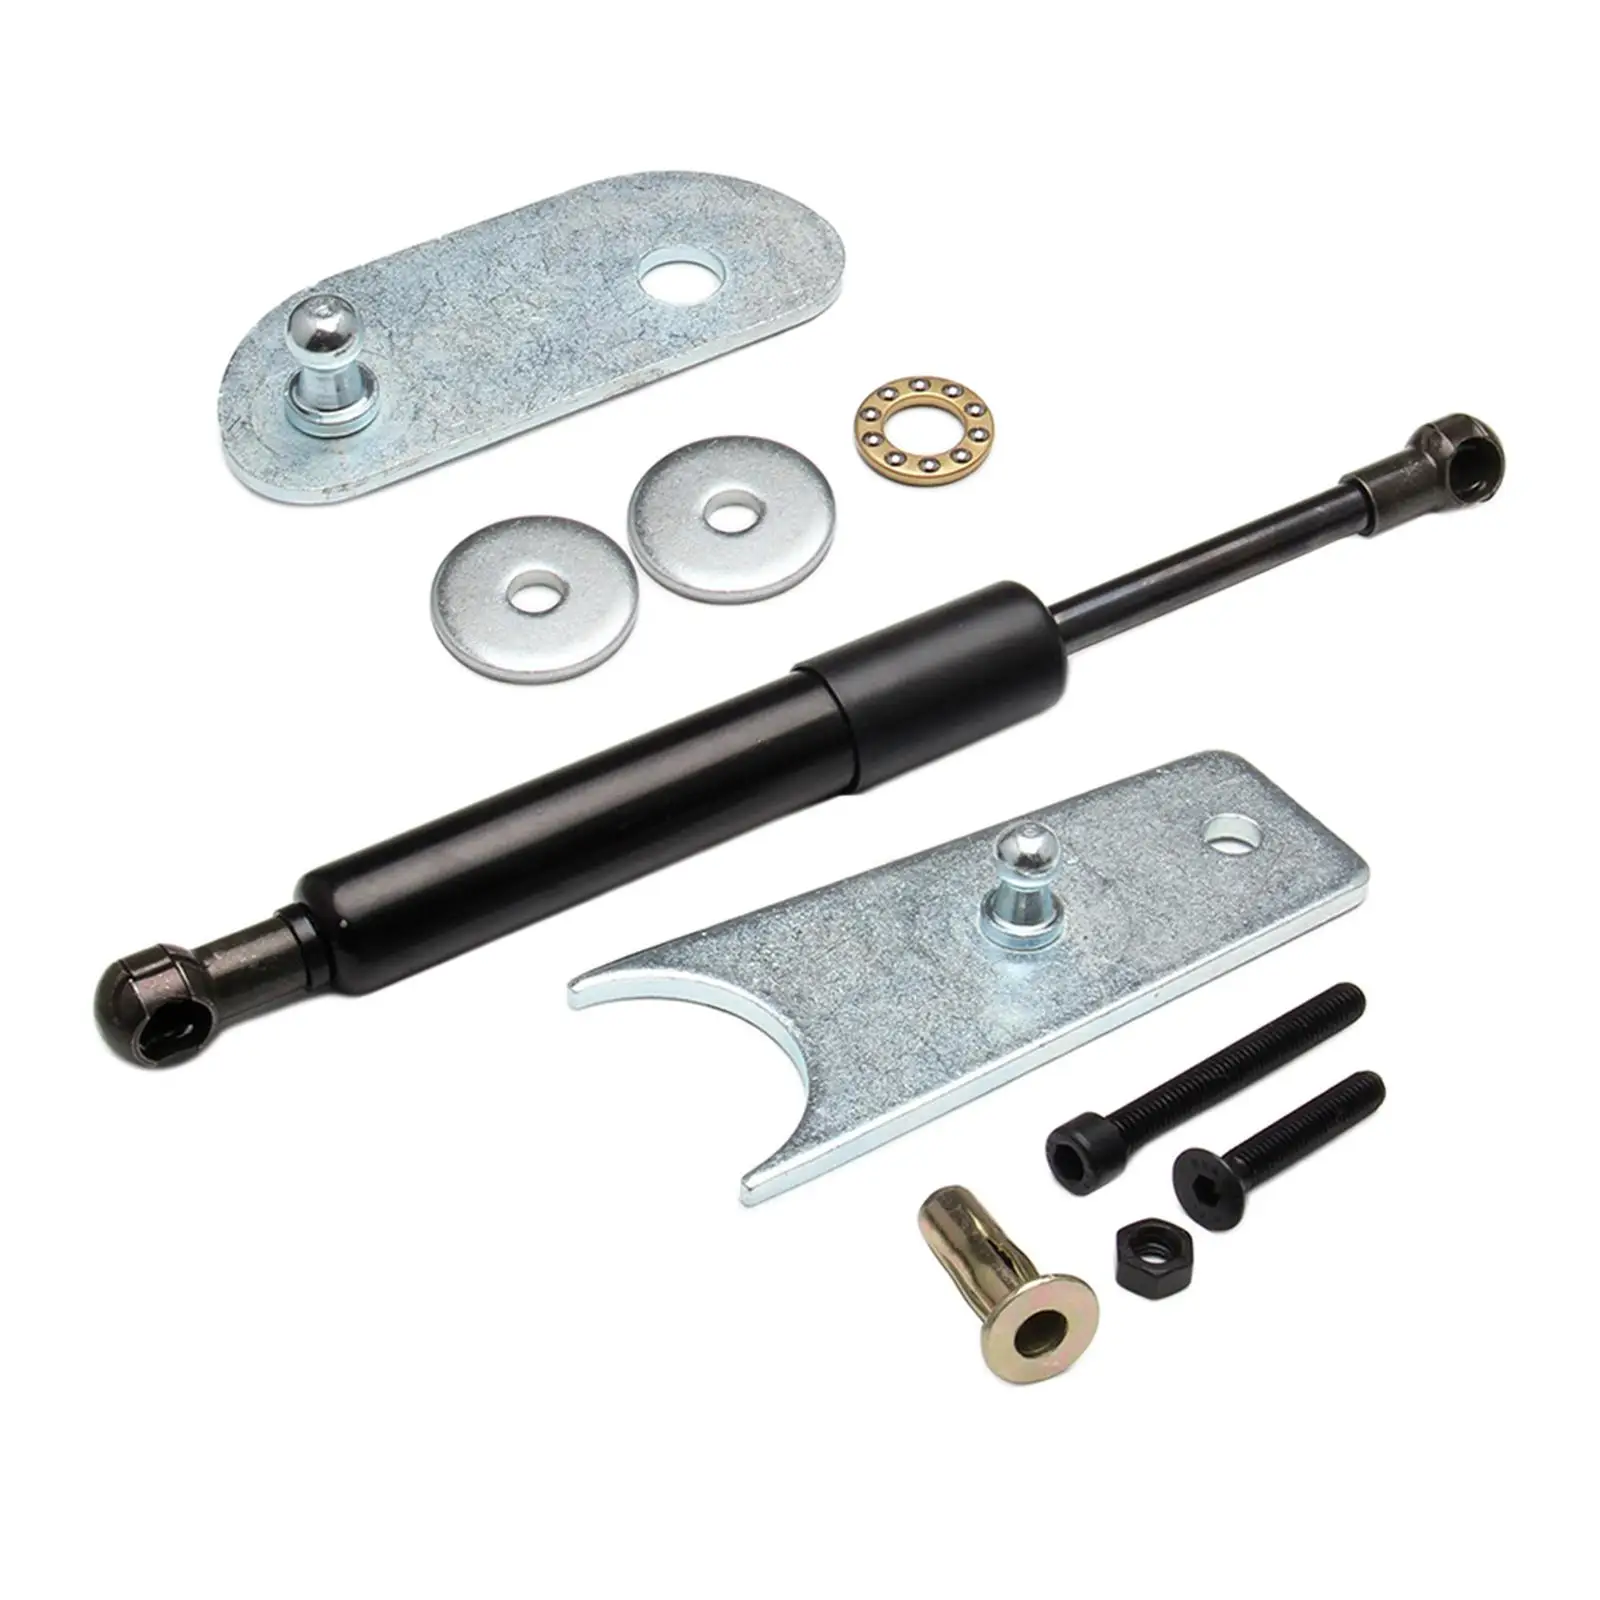 TS-SIL07 Trunk Tailgate Assist Shock Strut Lift Support w/ Accessories Fit for Chevrolet /